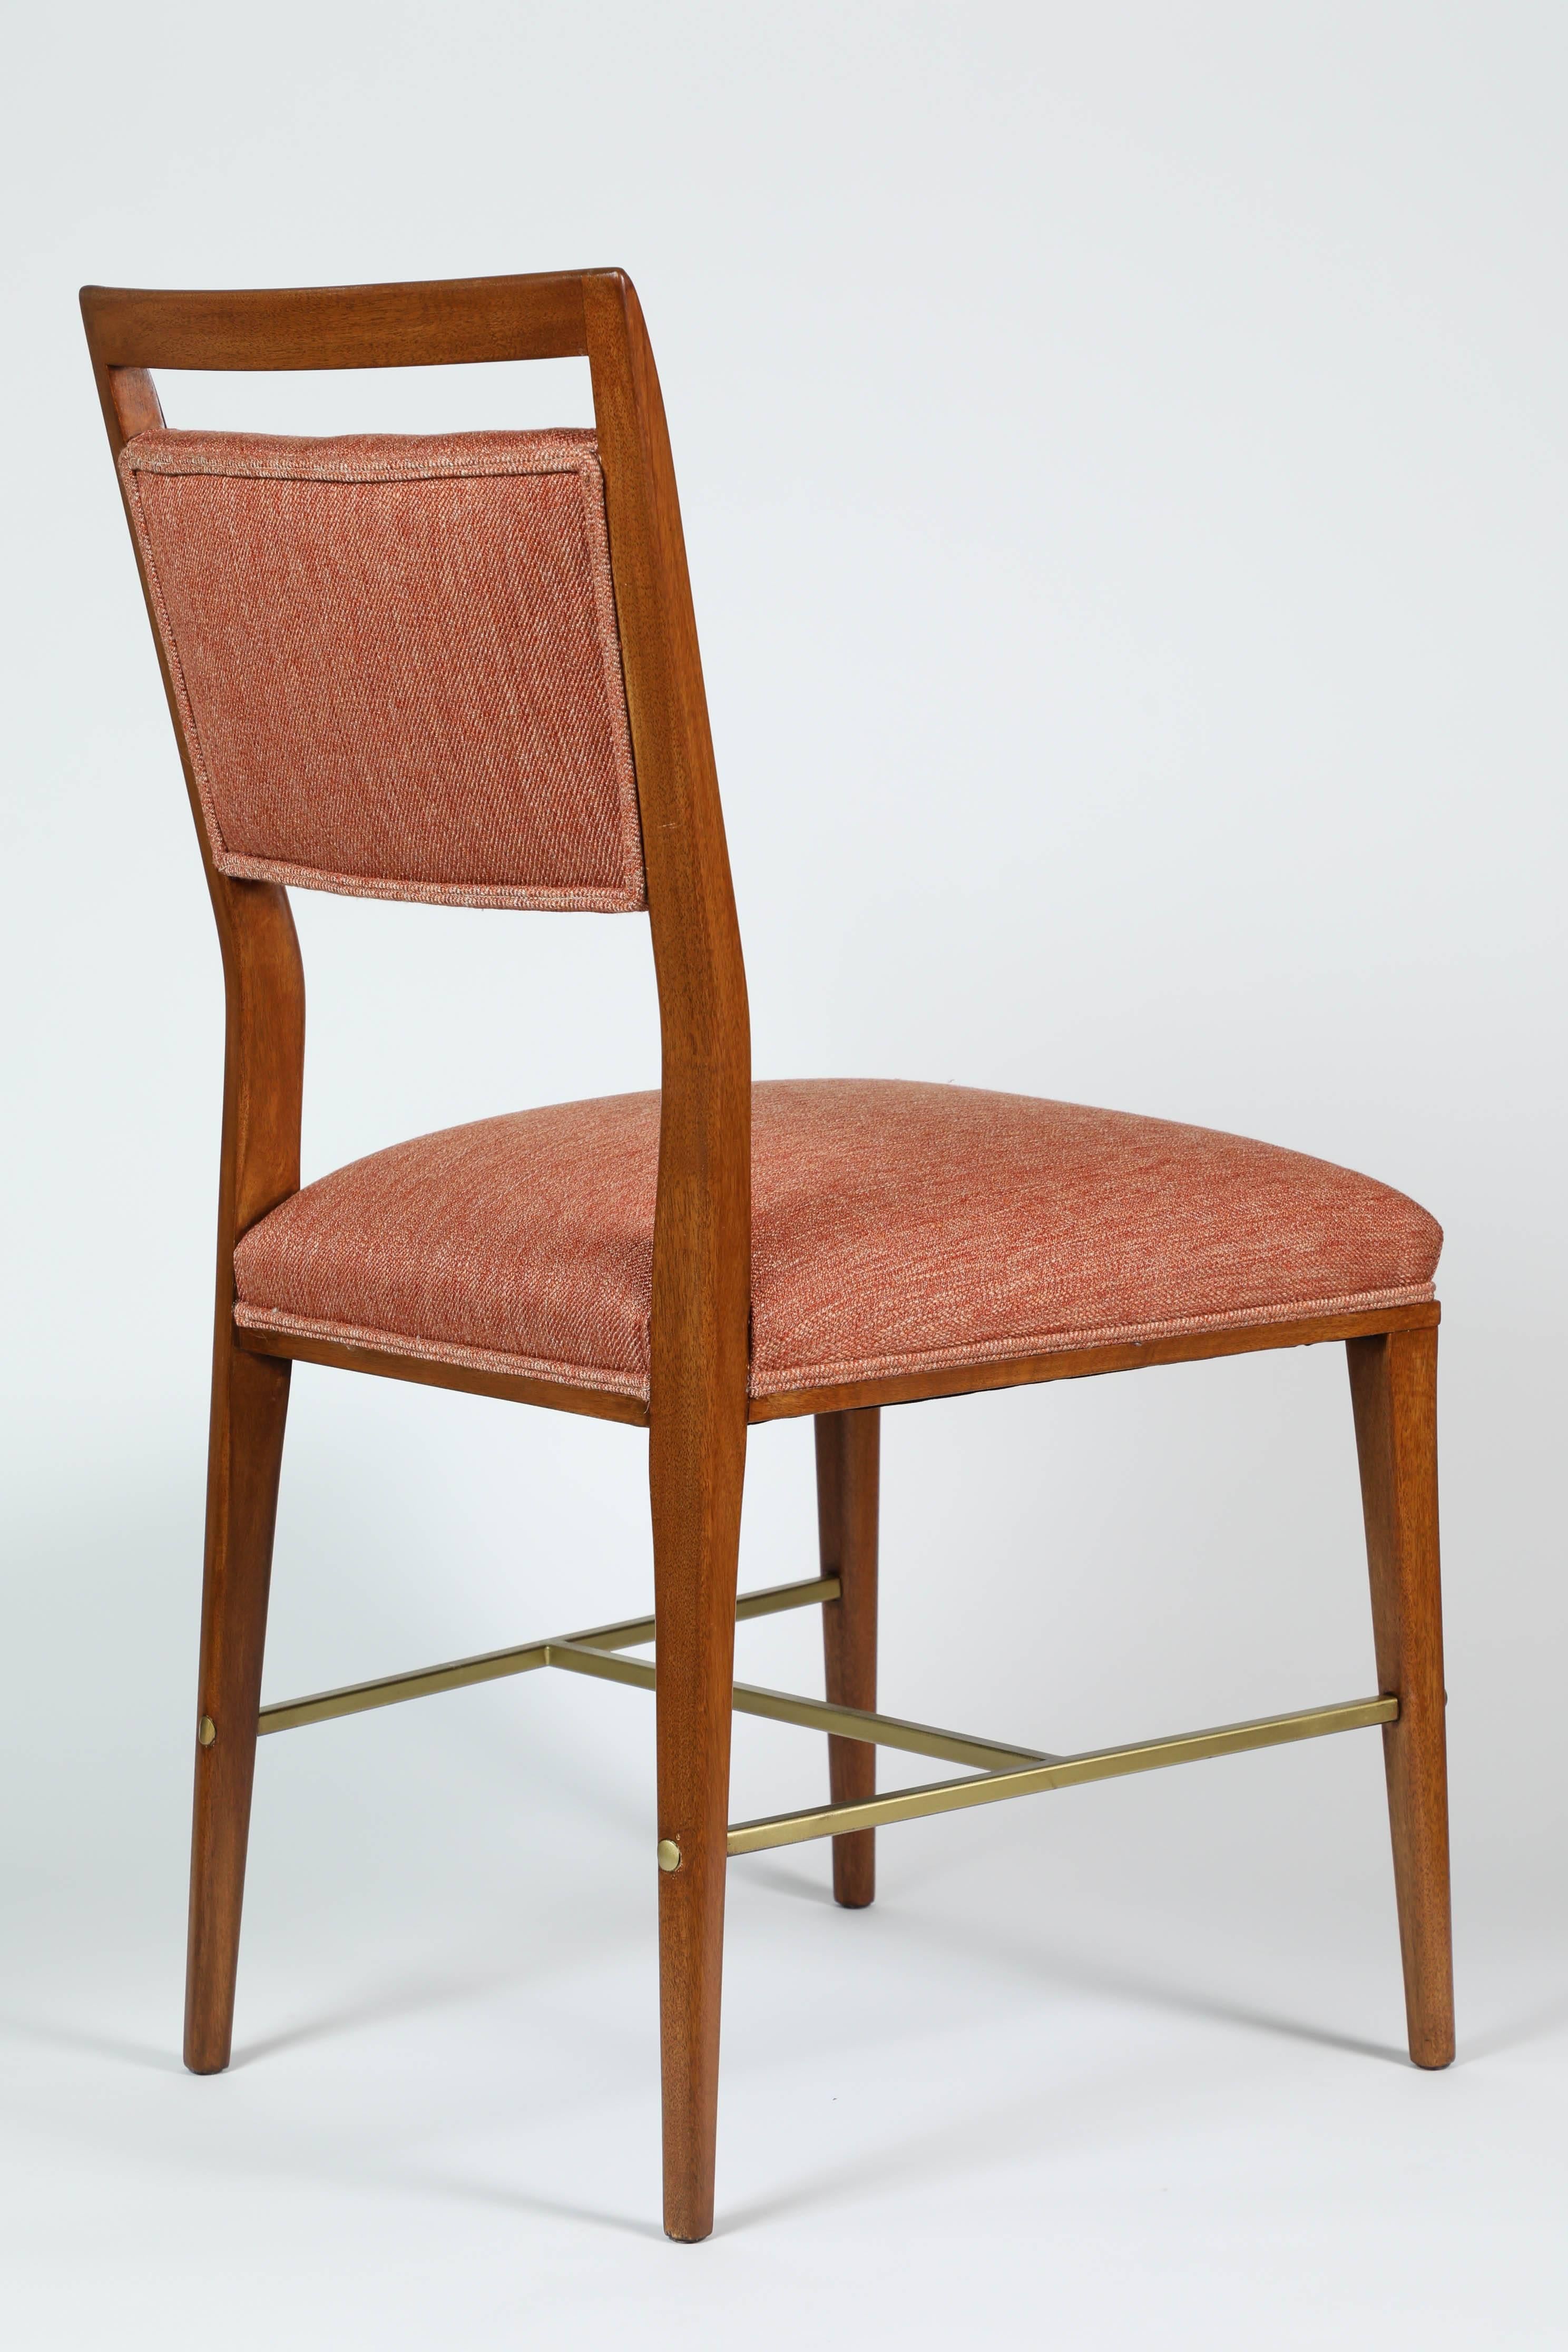 Restored and reupholstered eight dining chairs, two with arms.
Dark honey colored wood with brass detail on the base of the legs.
Very comfortable
Chairs: 36